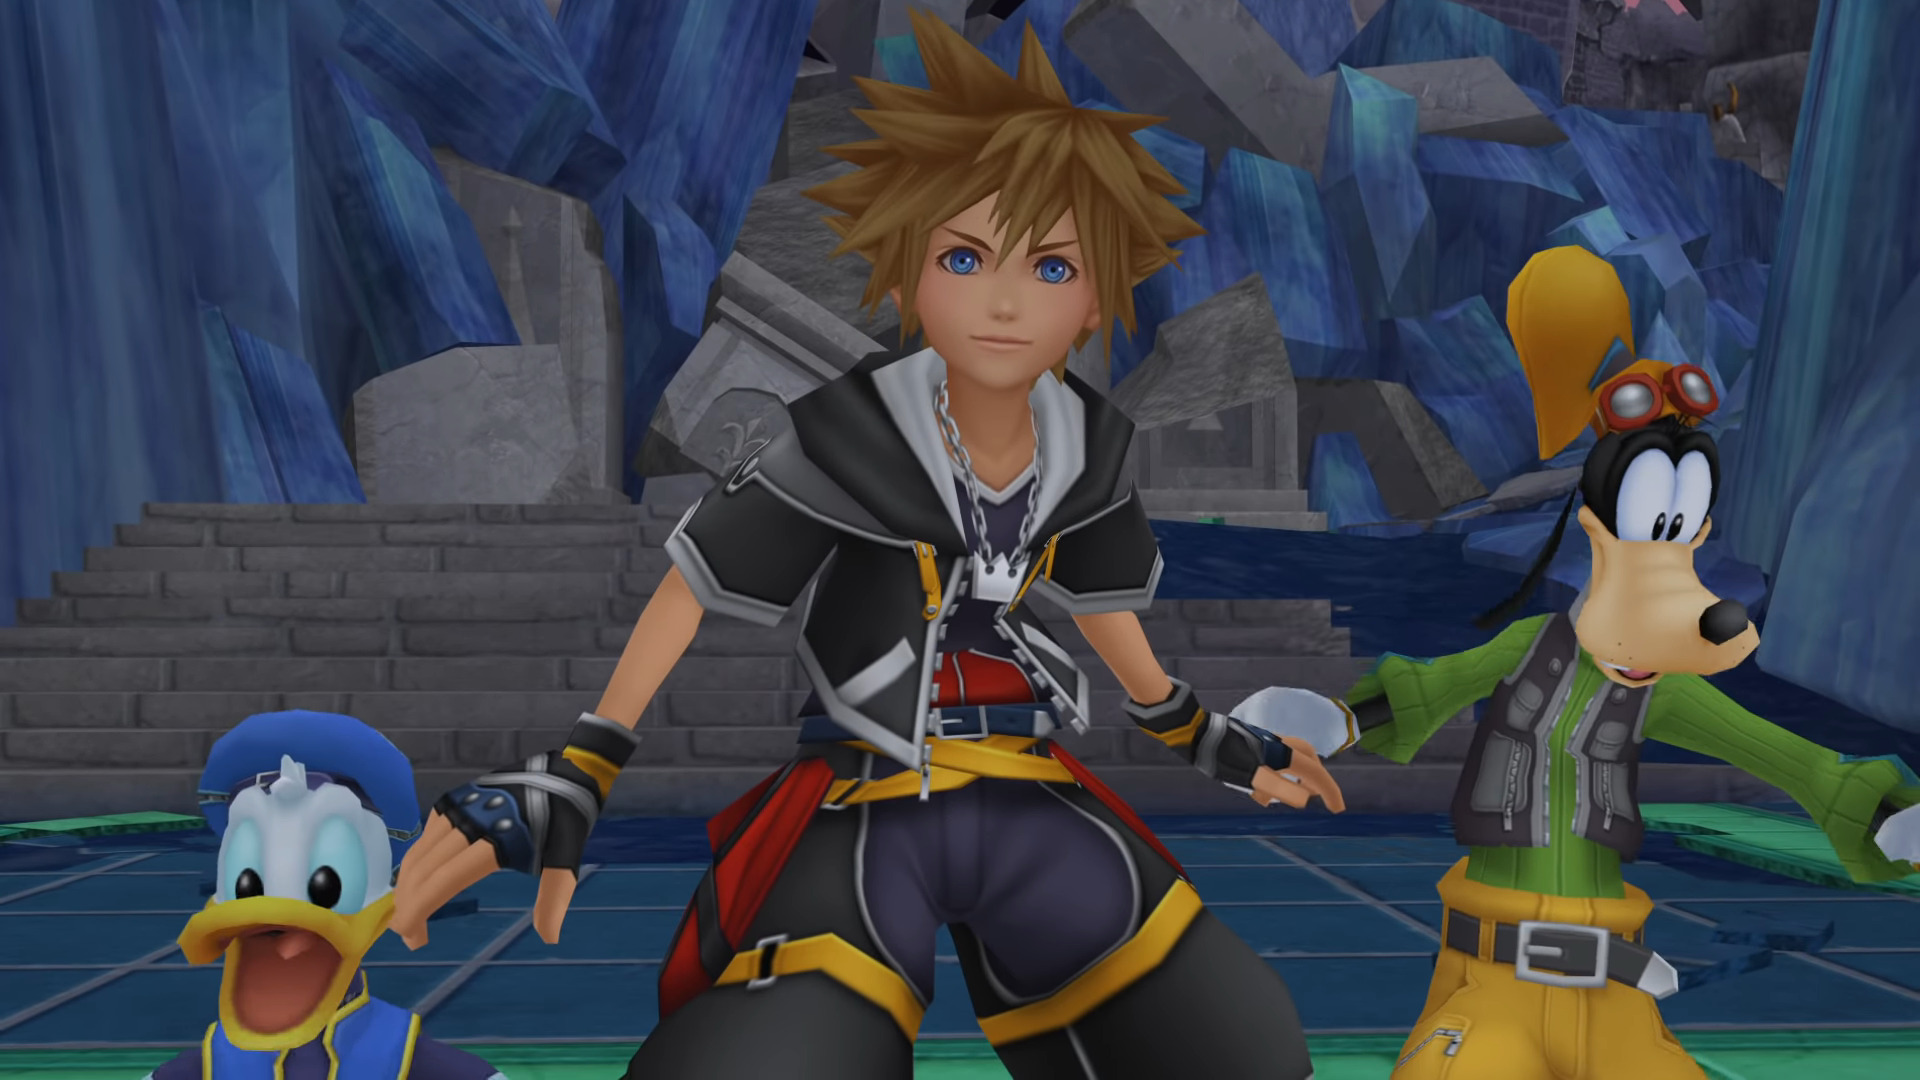 Square Enix revealed that the earlier titles in the Kingdom Hearts series w...